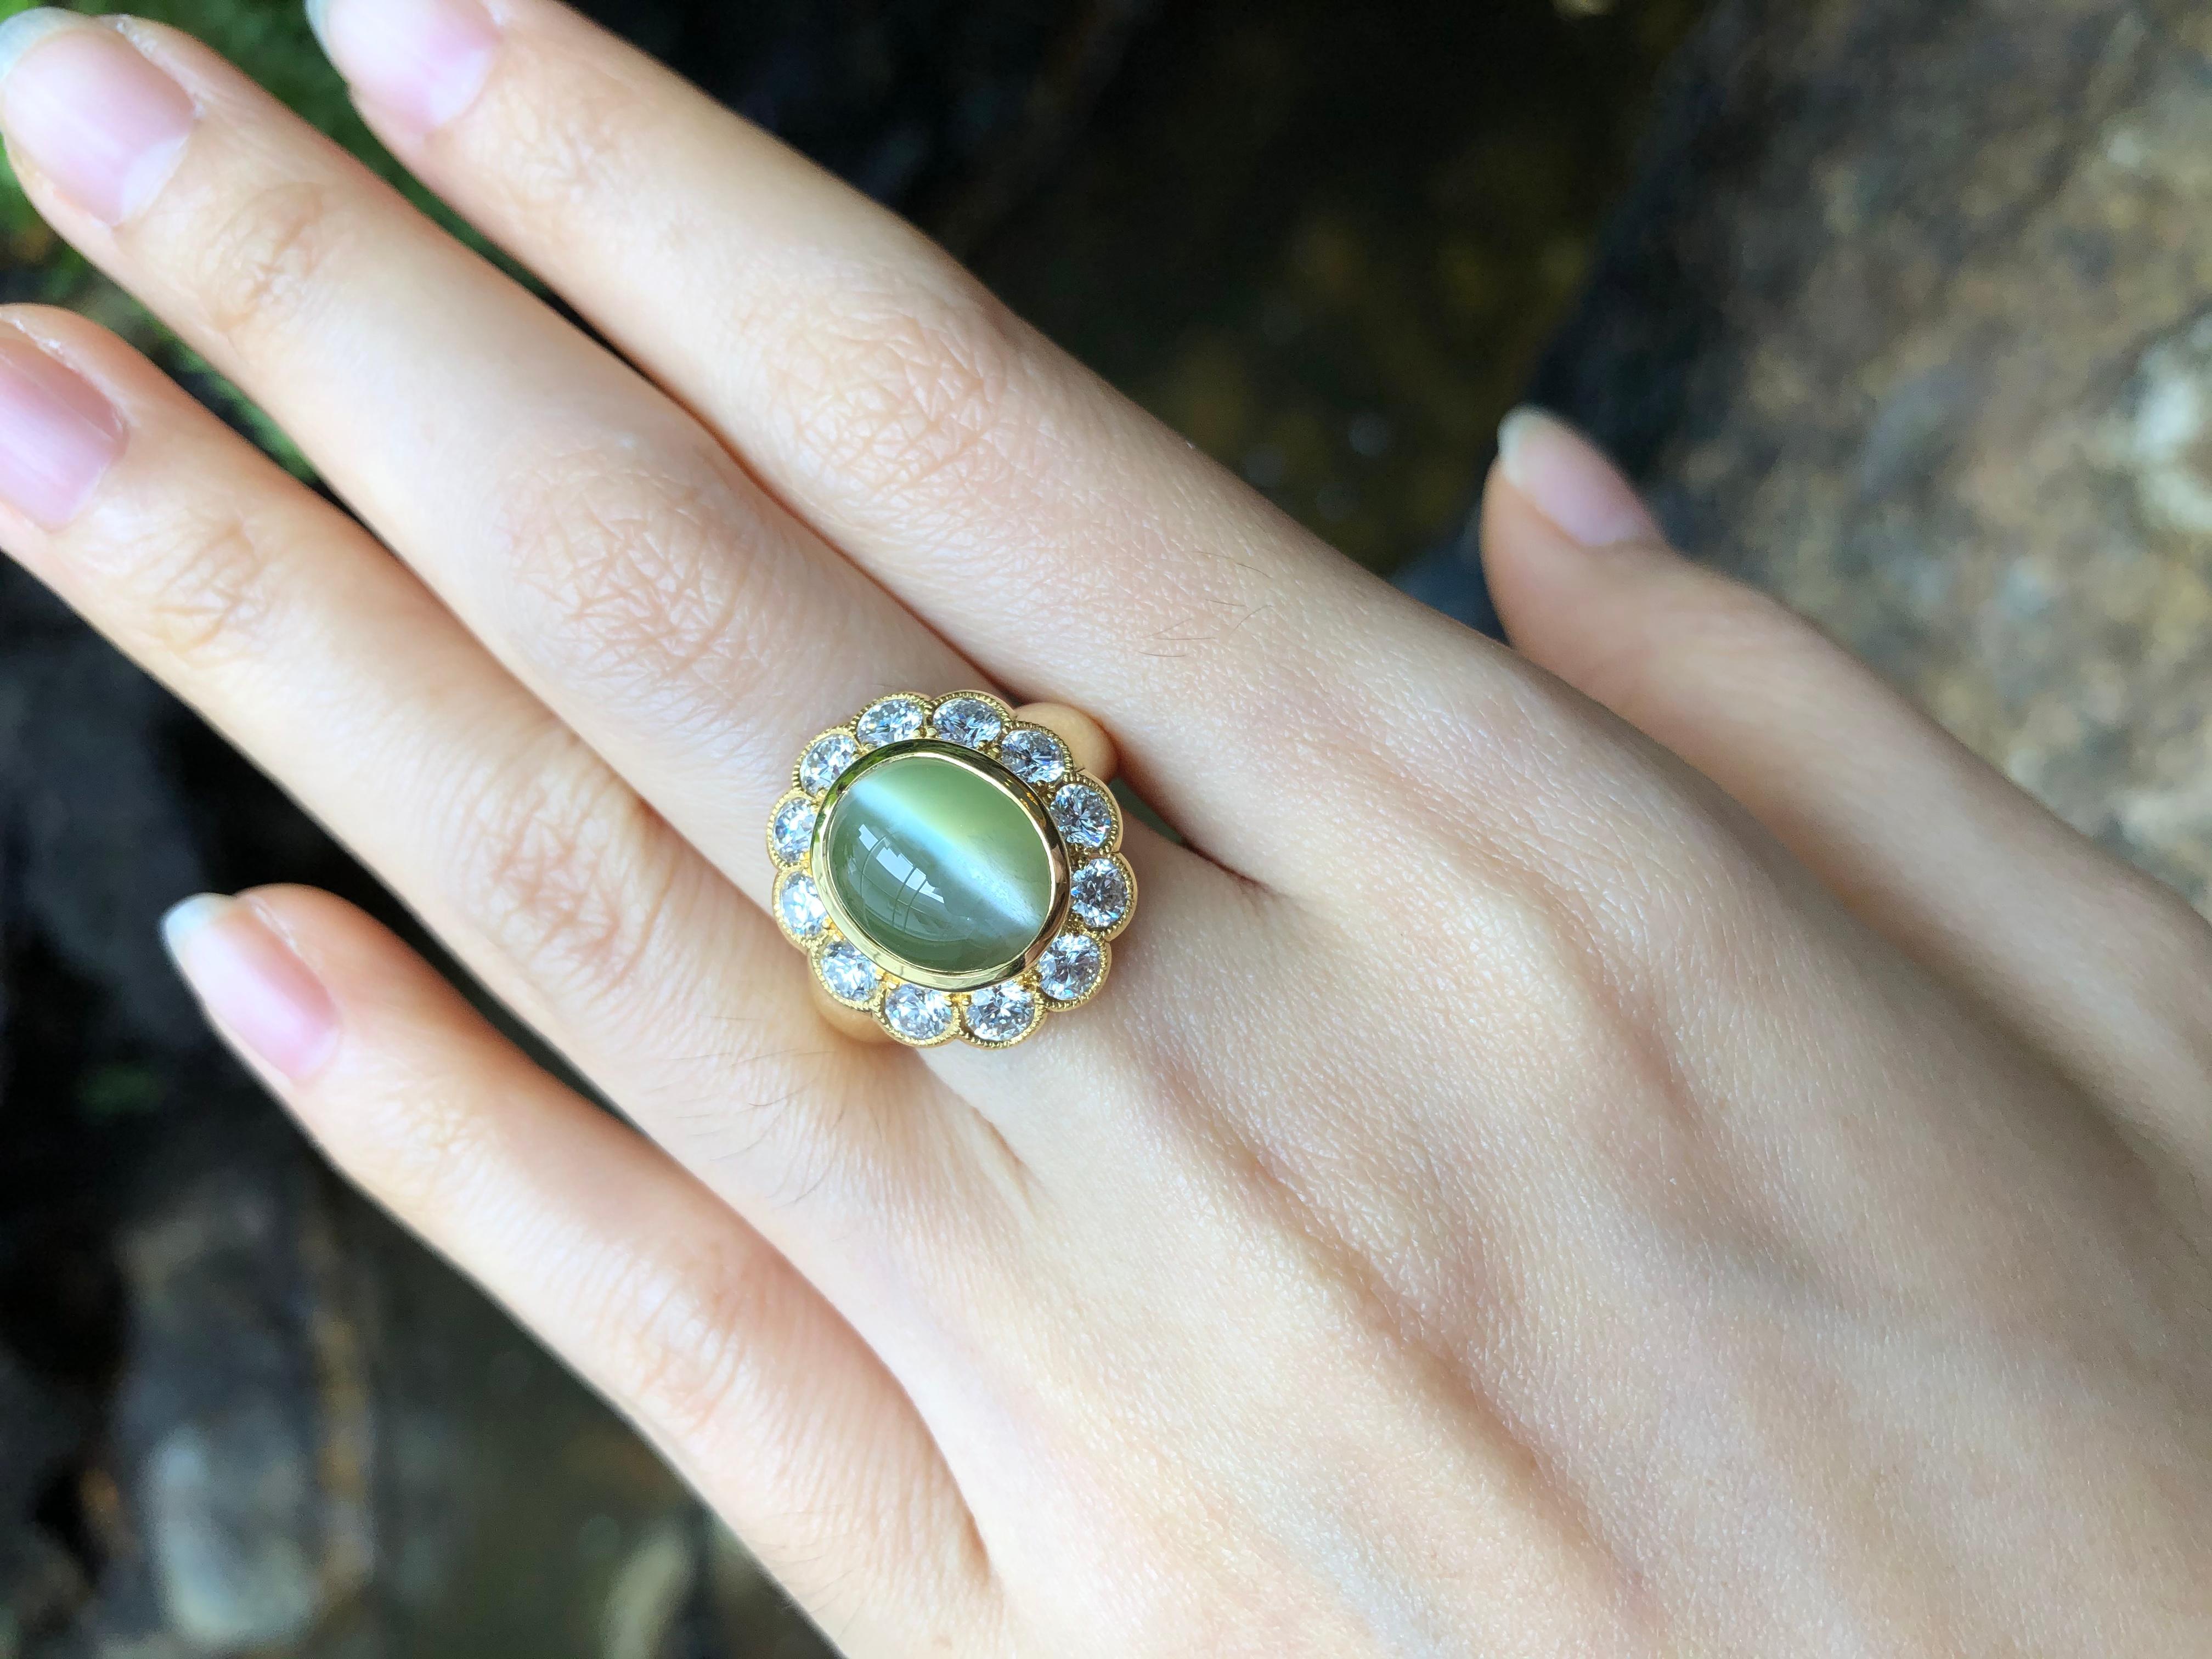 Chrysoberyl Cat's Eye 8.38 carats with Diamond 1.57 carats Ring set in 18 Karat Gold Settings
(GIA Certified)

Width:  1.7 cm 
Length: 1.9 cm
Ring Size: 51
Total Weight: 9.69 grams

